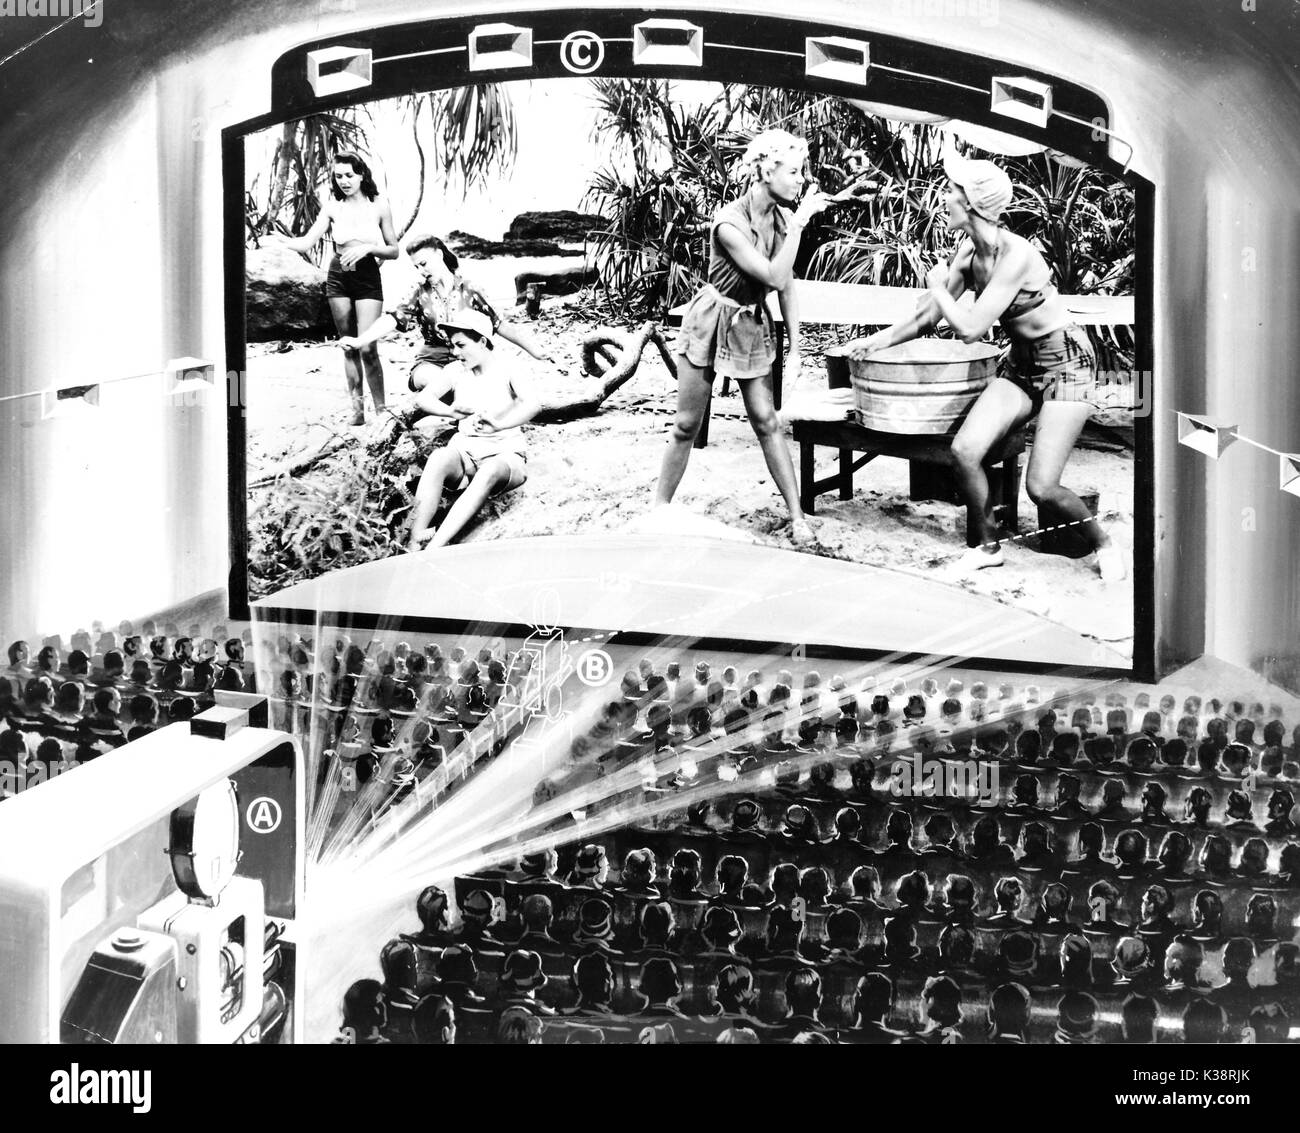 A DIAGRAM ILLUSTRATING A SCENE FROM SOUTH PACIFIC BEING PROJECTED FROM 70MM FILM, WIDER THAN THE STANDARD 35MM Illustration of a scene from the 1958 film South Pacific being projected from 70mm film, wider than the standard 35mm. Stock Photo